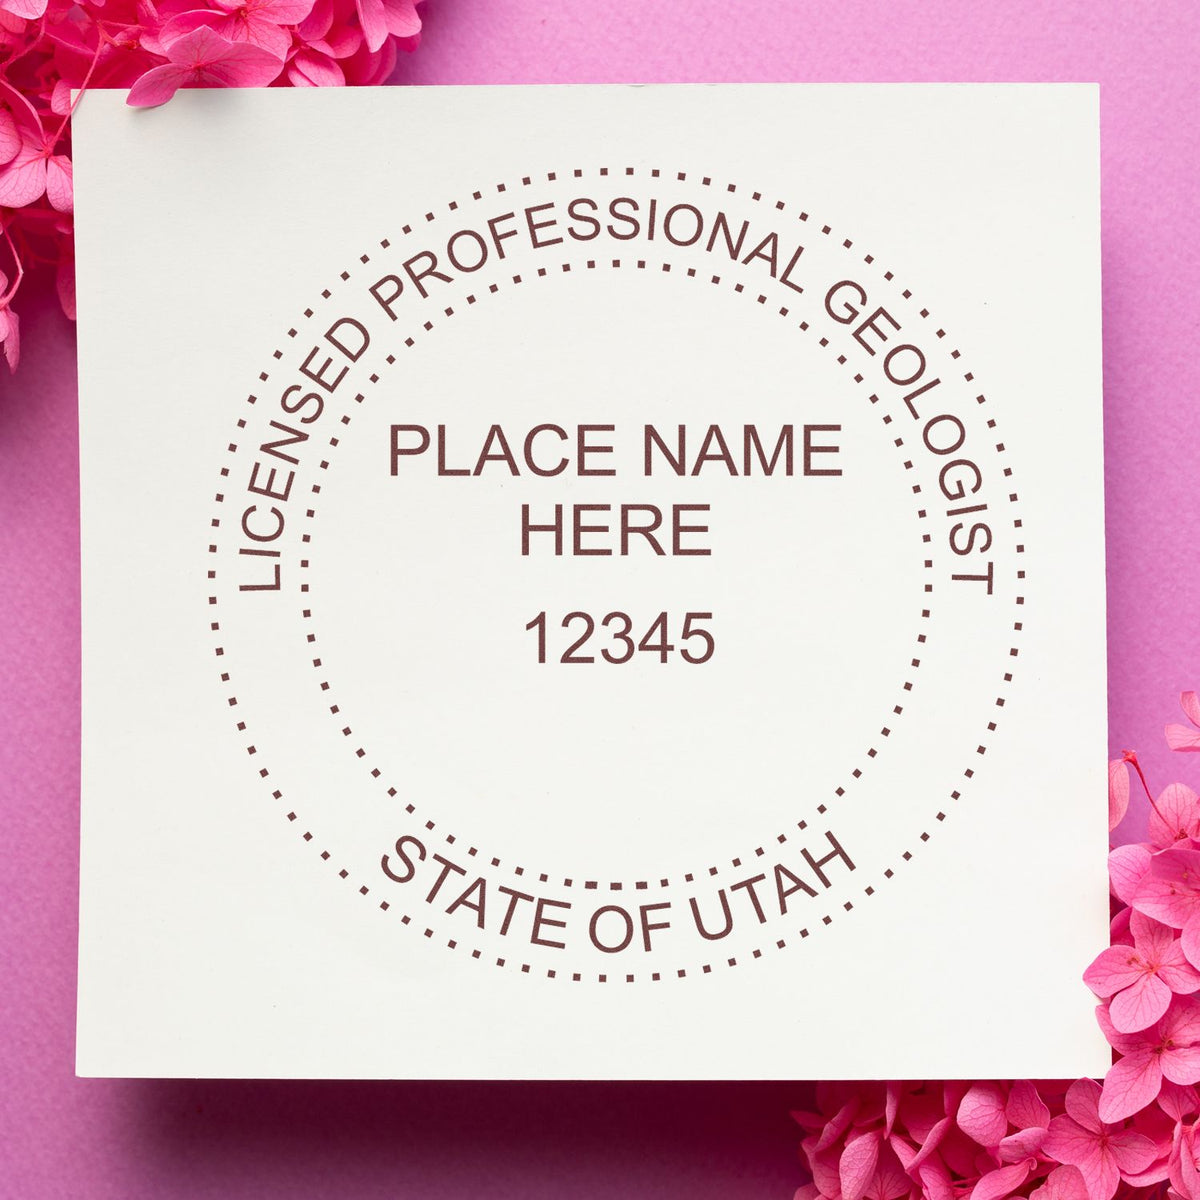 The Self-Inking Utah Geologist Stamp stamp impression comes to life with a crisp, detailed image stamped on paper - showcasing true professional quality.